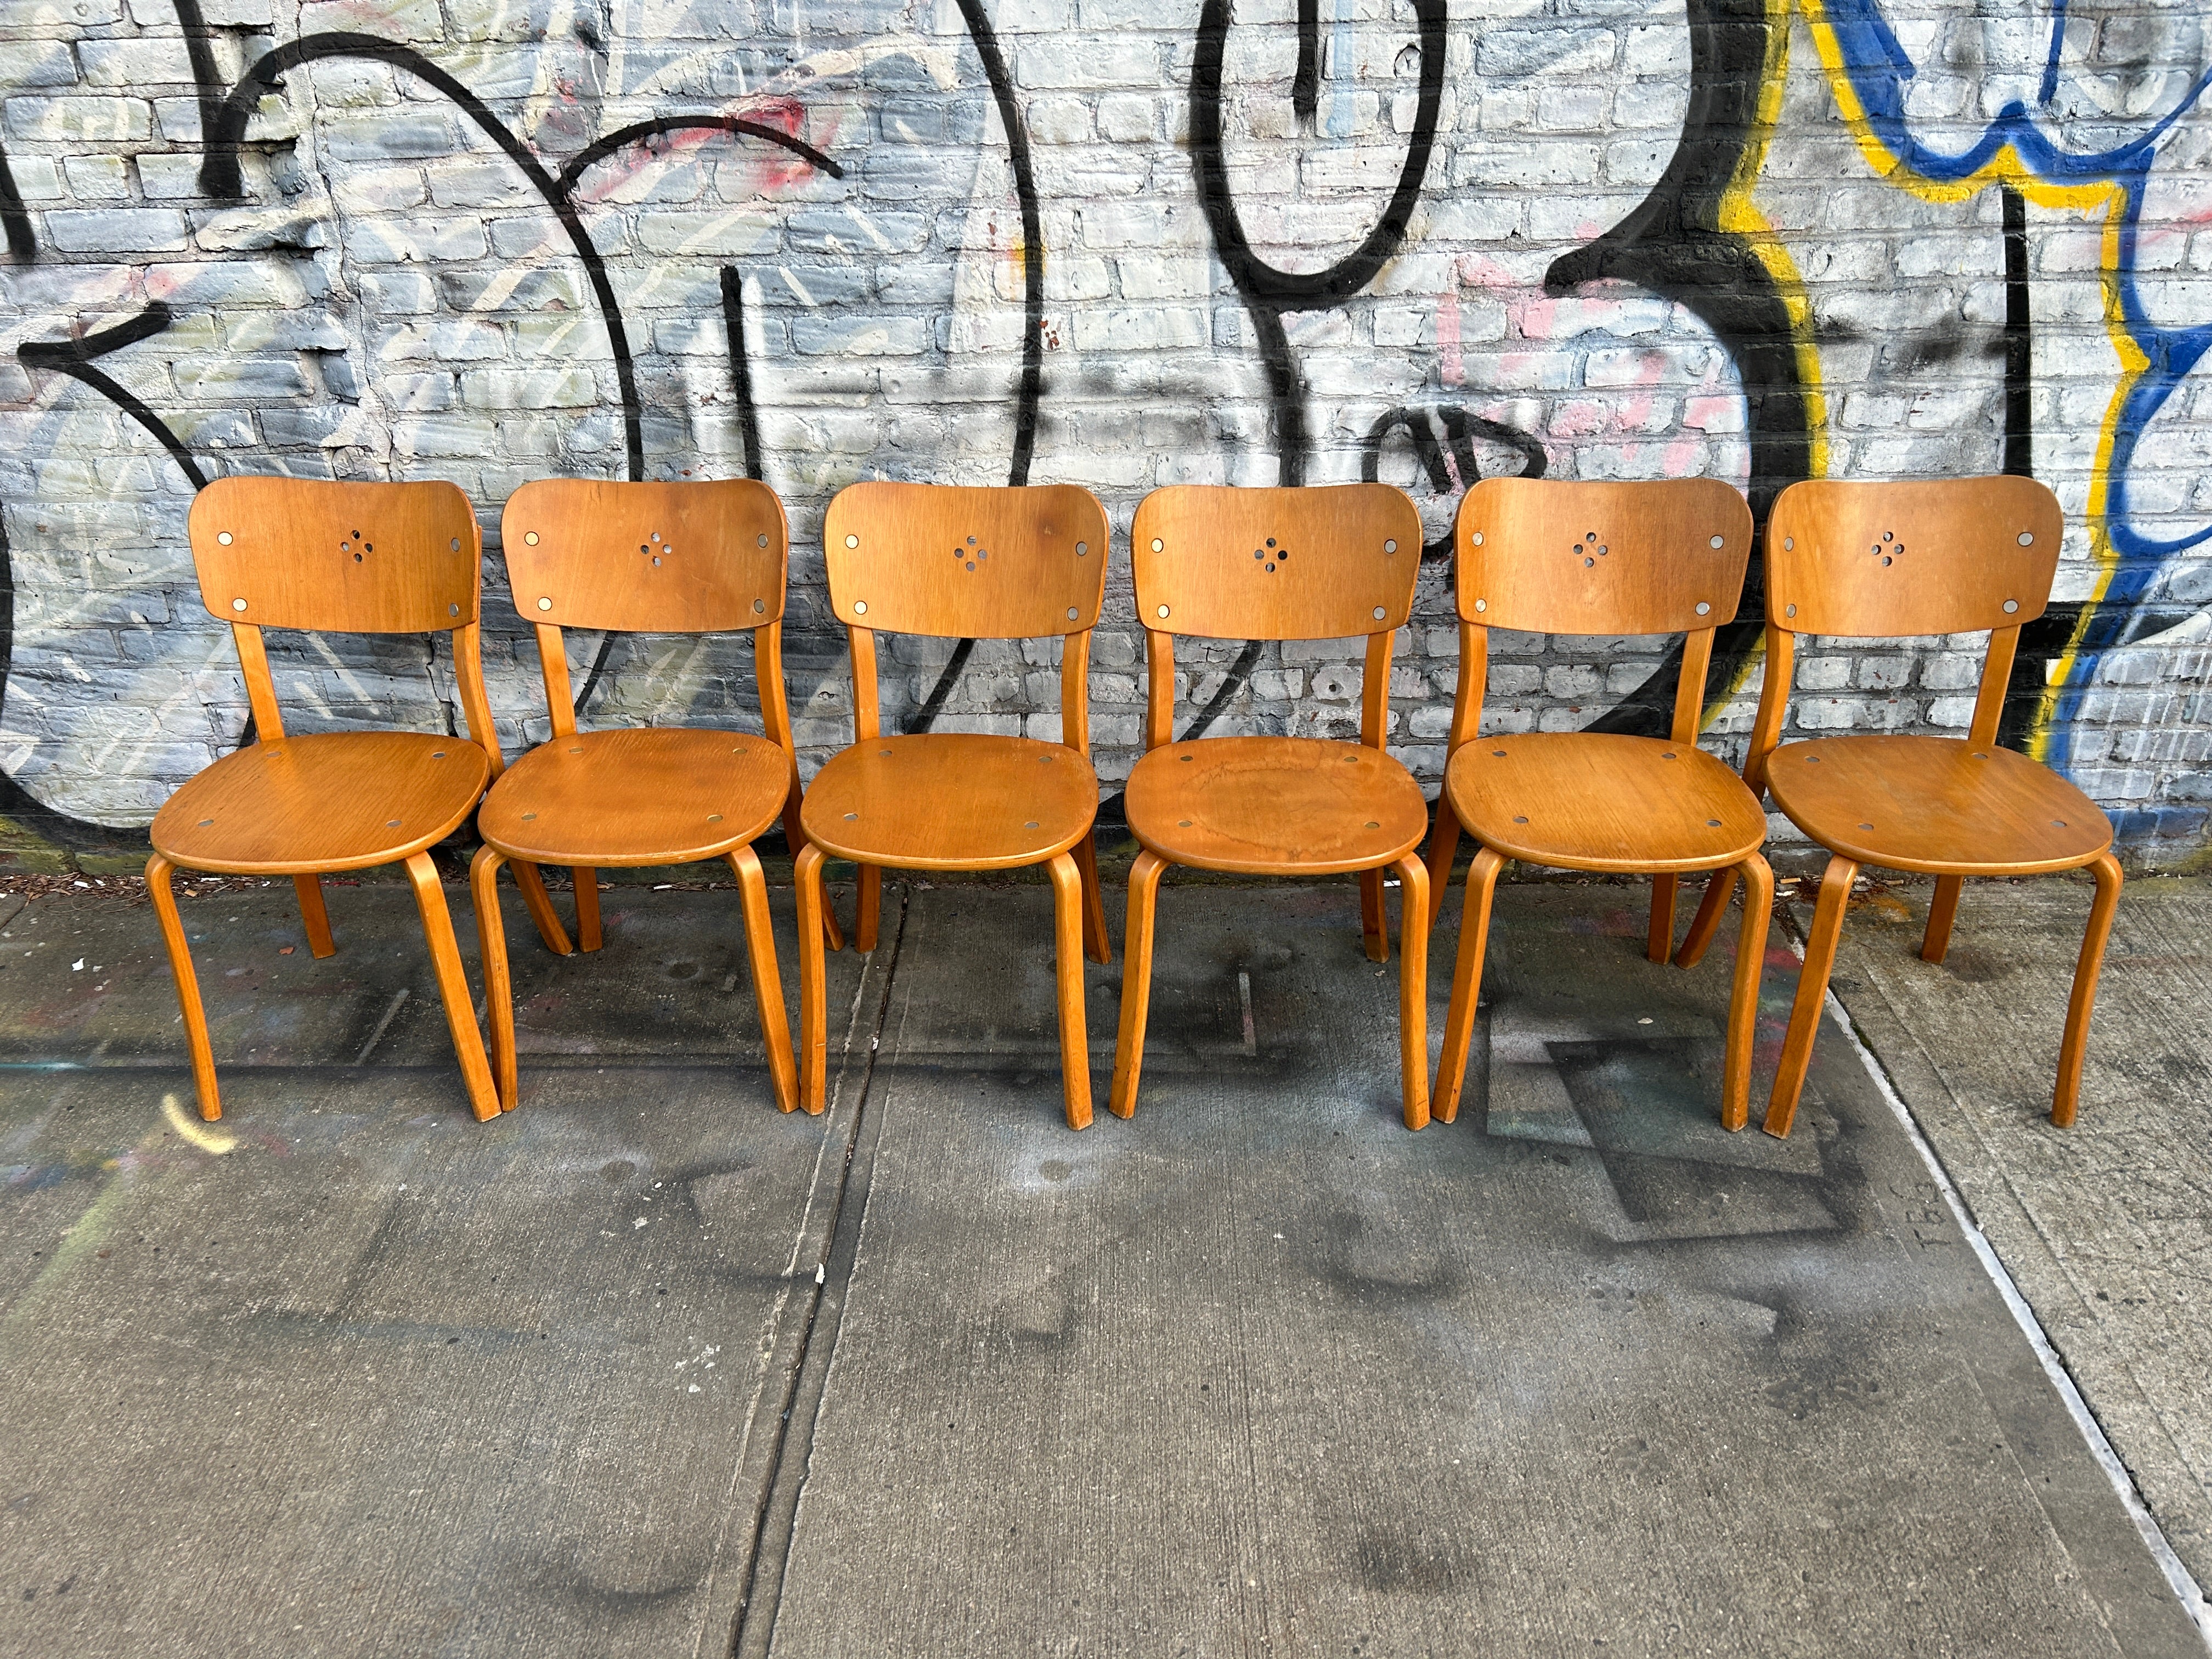 Mid-Century Modern Swedish Modern set of 6 bentwood Dining chairs. Great minimalist design. Legs bolt on underneath with bentwood legs and back with 4 center accent holes in backrest. Very Unique chairs. Matching set of 6 chairs. No labels or marks.